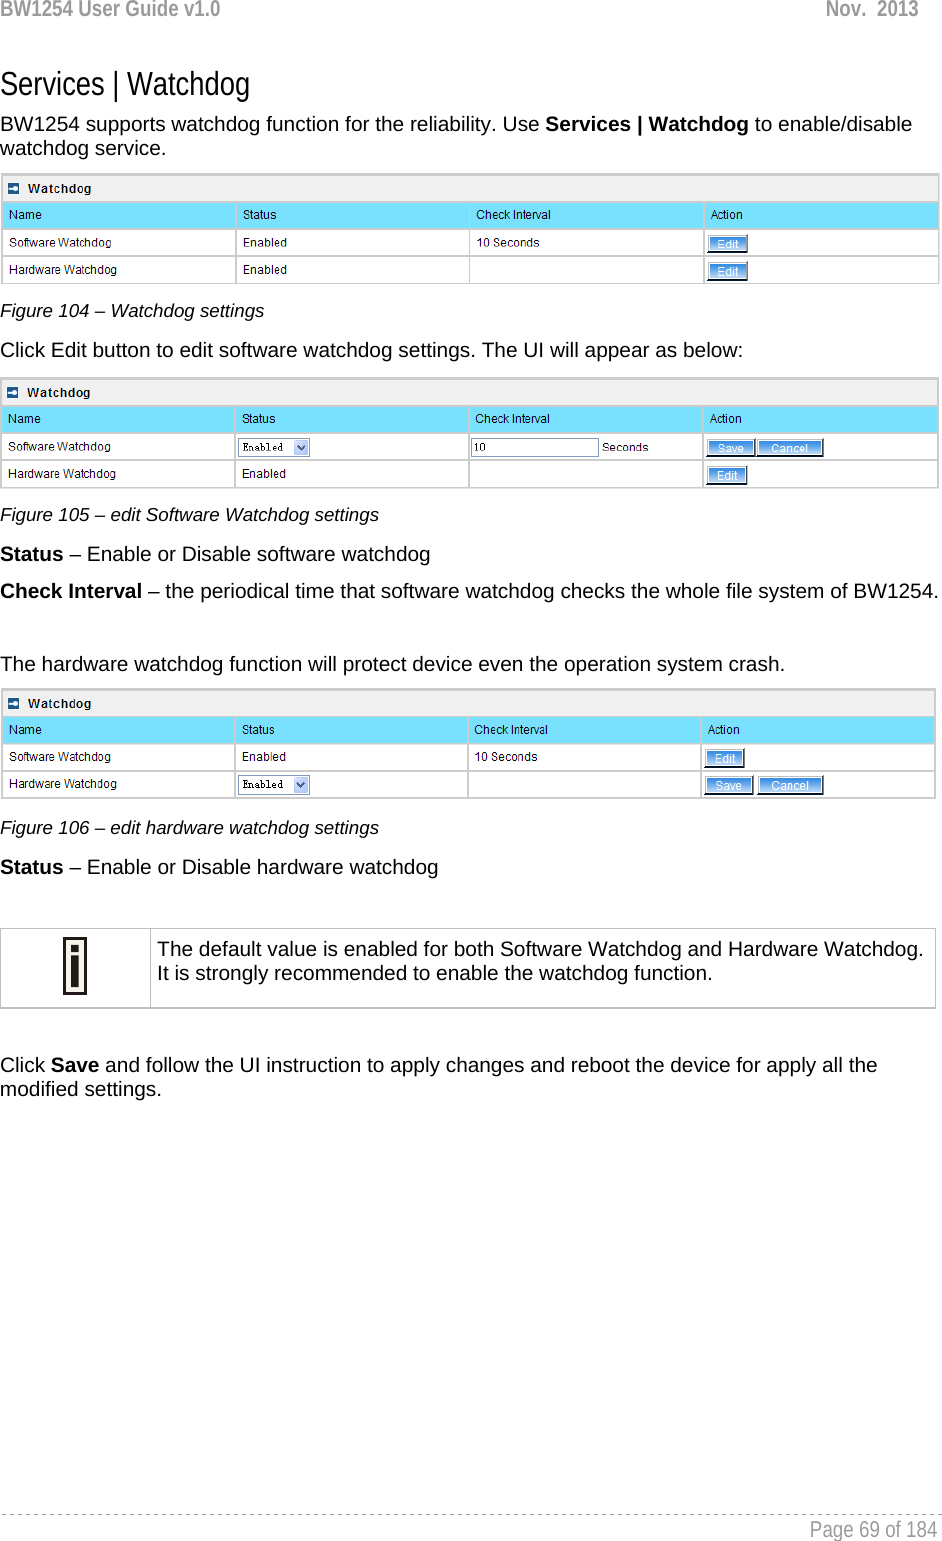 BW1254 User Guide v1.0  Nov.  2013     Page 69 of 184   Services | Watchdog BW1254 supports watchdog function for the reliability. Use Services | Watchdog to enable/disable watchdog service.   Figure 104 – Watchdog settings Click Edit button to edit software watchdog settings. The UI will appear as below:  Figure 105 – edit Software Watchdog settings Status – Enable or Disable software watchdog Check Interval – the periodical time that software watchdog checks the whole file system of BW1254.   The hardware watchdog function will protect device even the operation system crash.  Figure 106 – edit hardware watchdog settings Status – Enable or Disable hardware watchdog   The default value is enabled for both Software Watchdog and Hardware Watchdog. It is strongly recommended to enable the watchdog function.   Click Save and follow the UI instruction to apply changes and reboot the device for apply all the modified settings.   